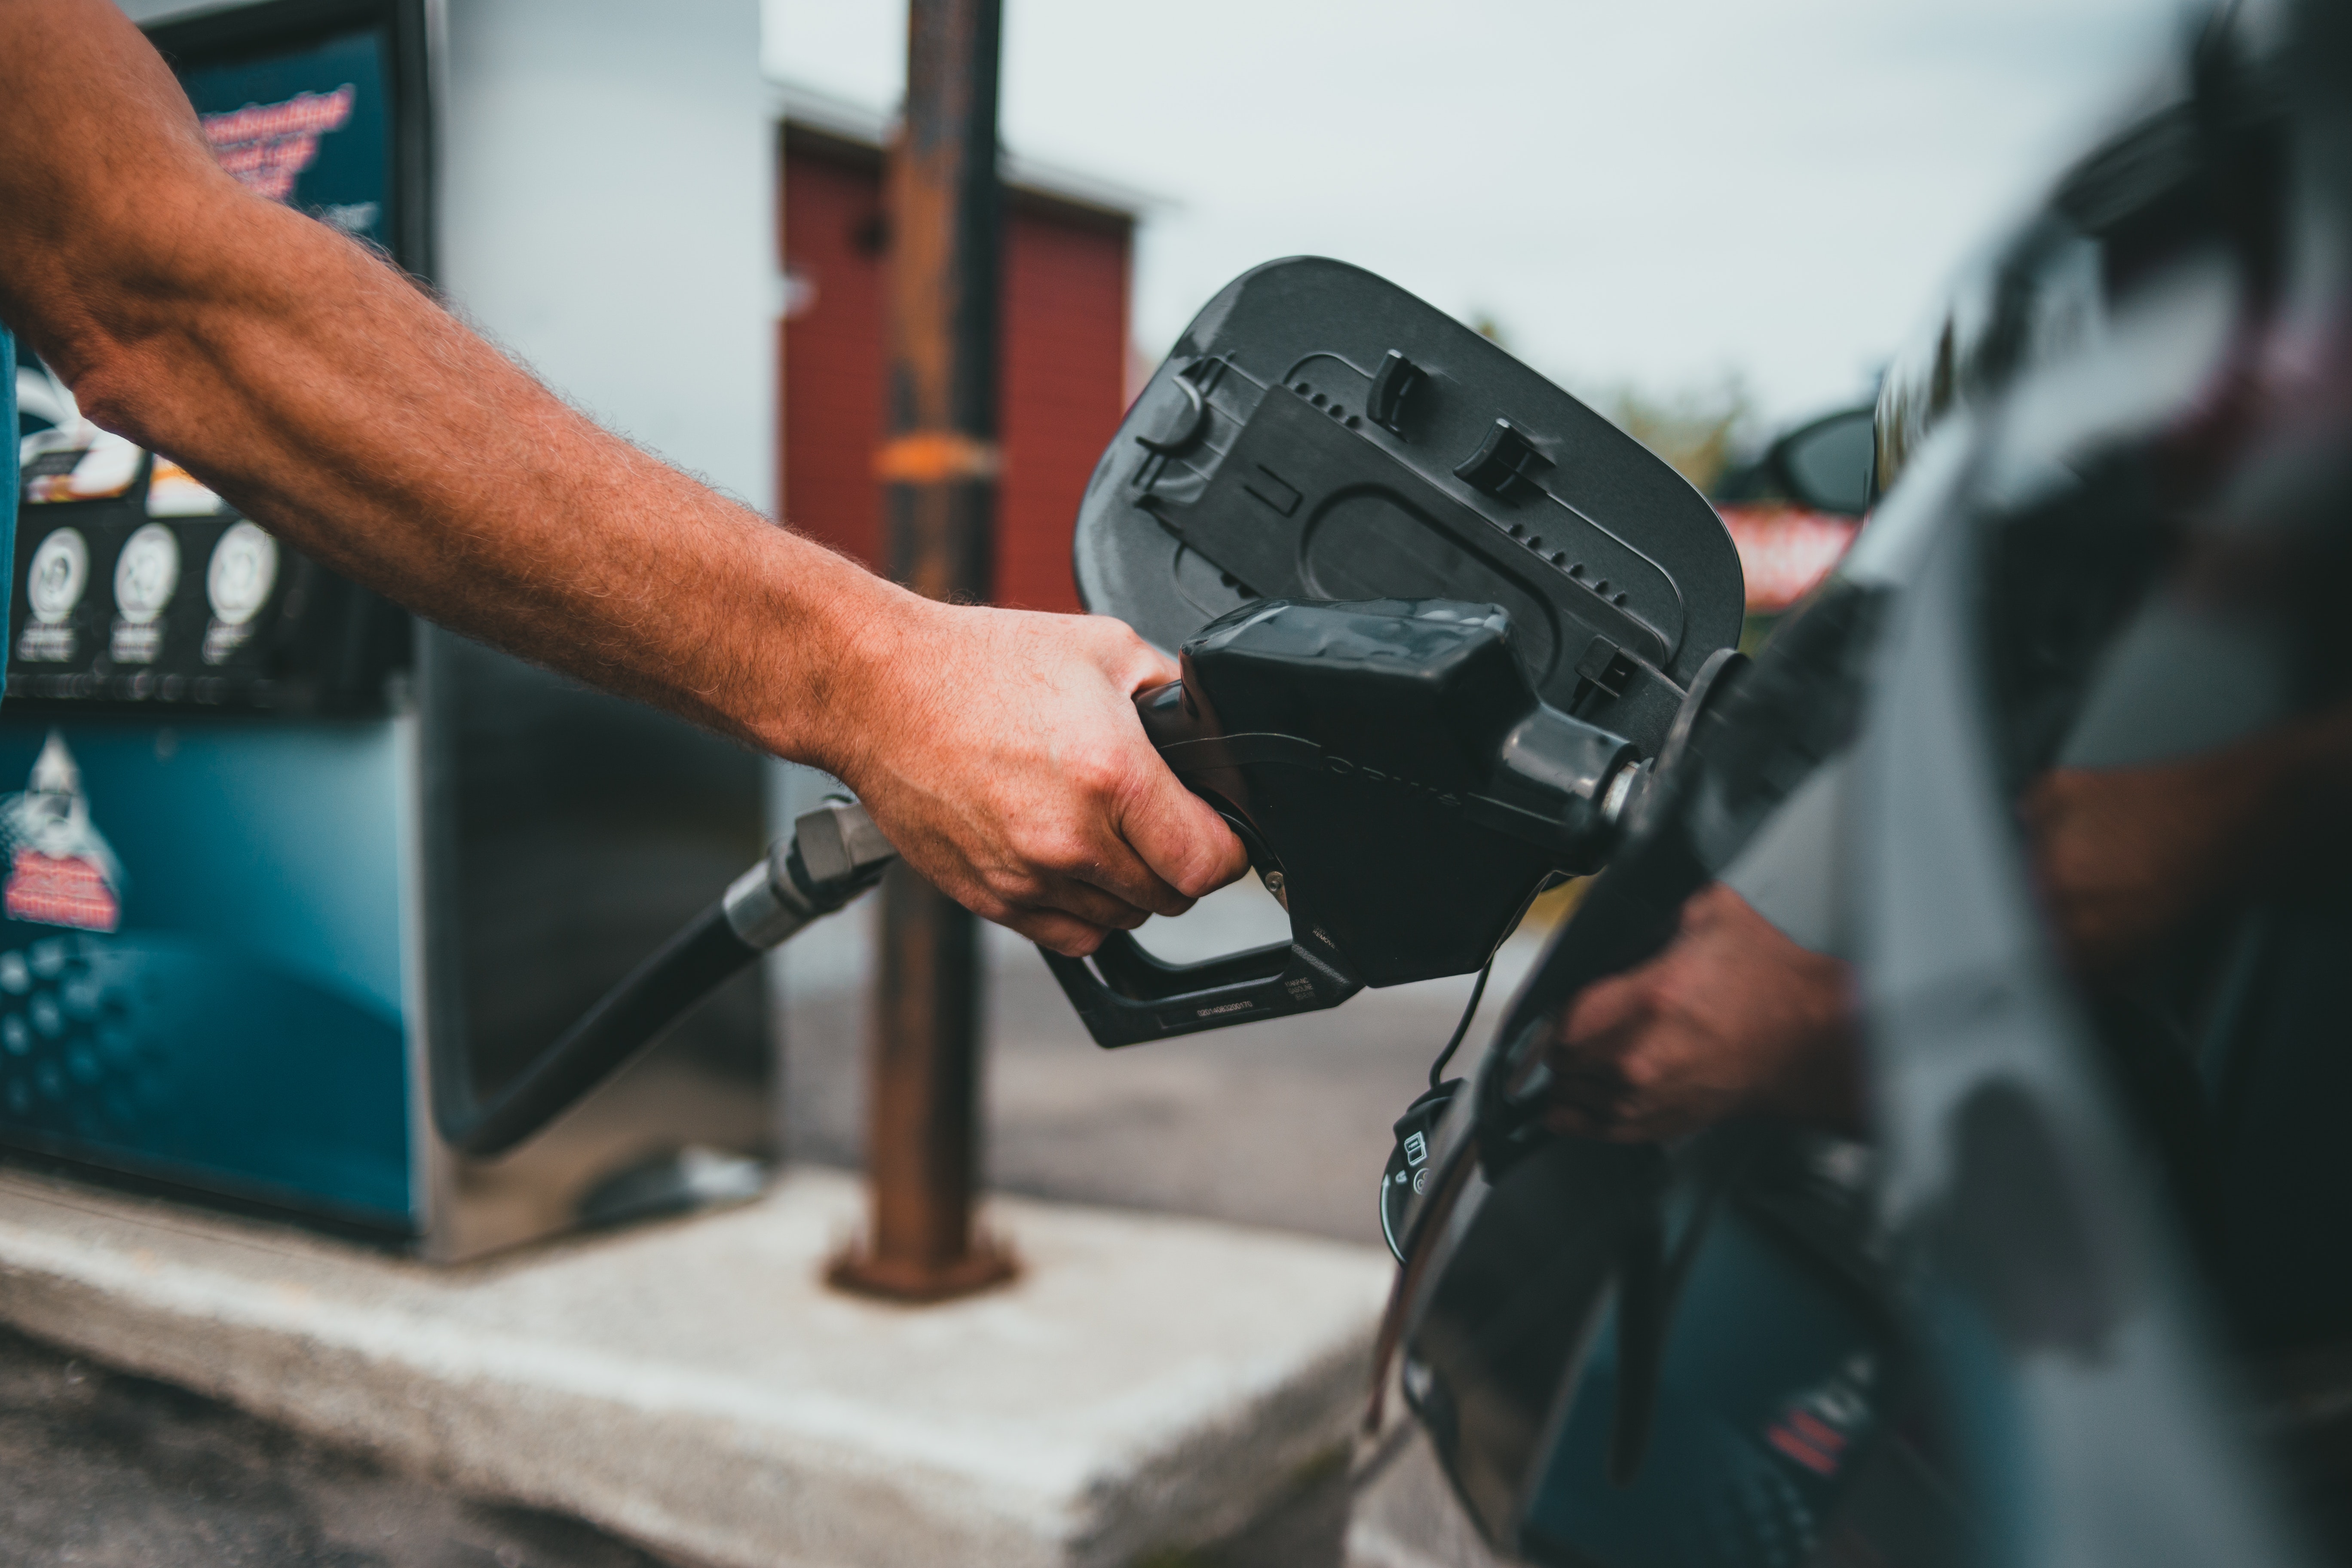 Person putting gasoline in car | Source: Pexels